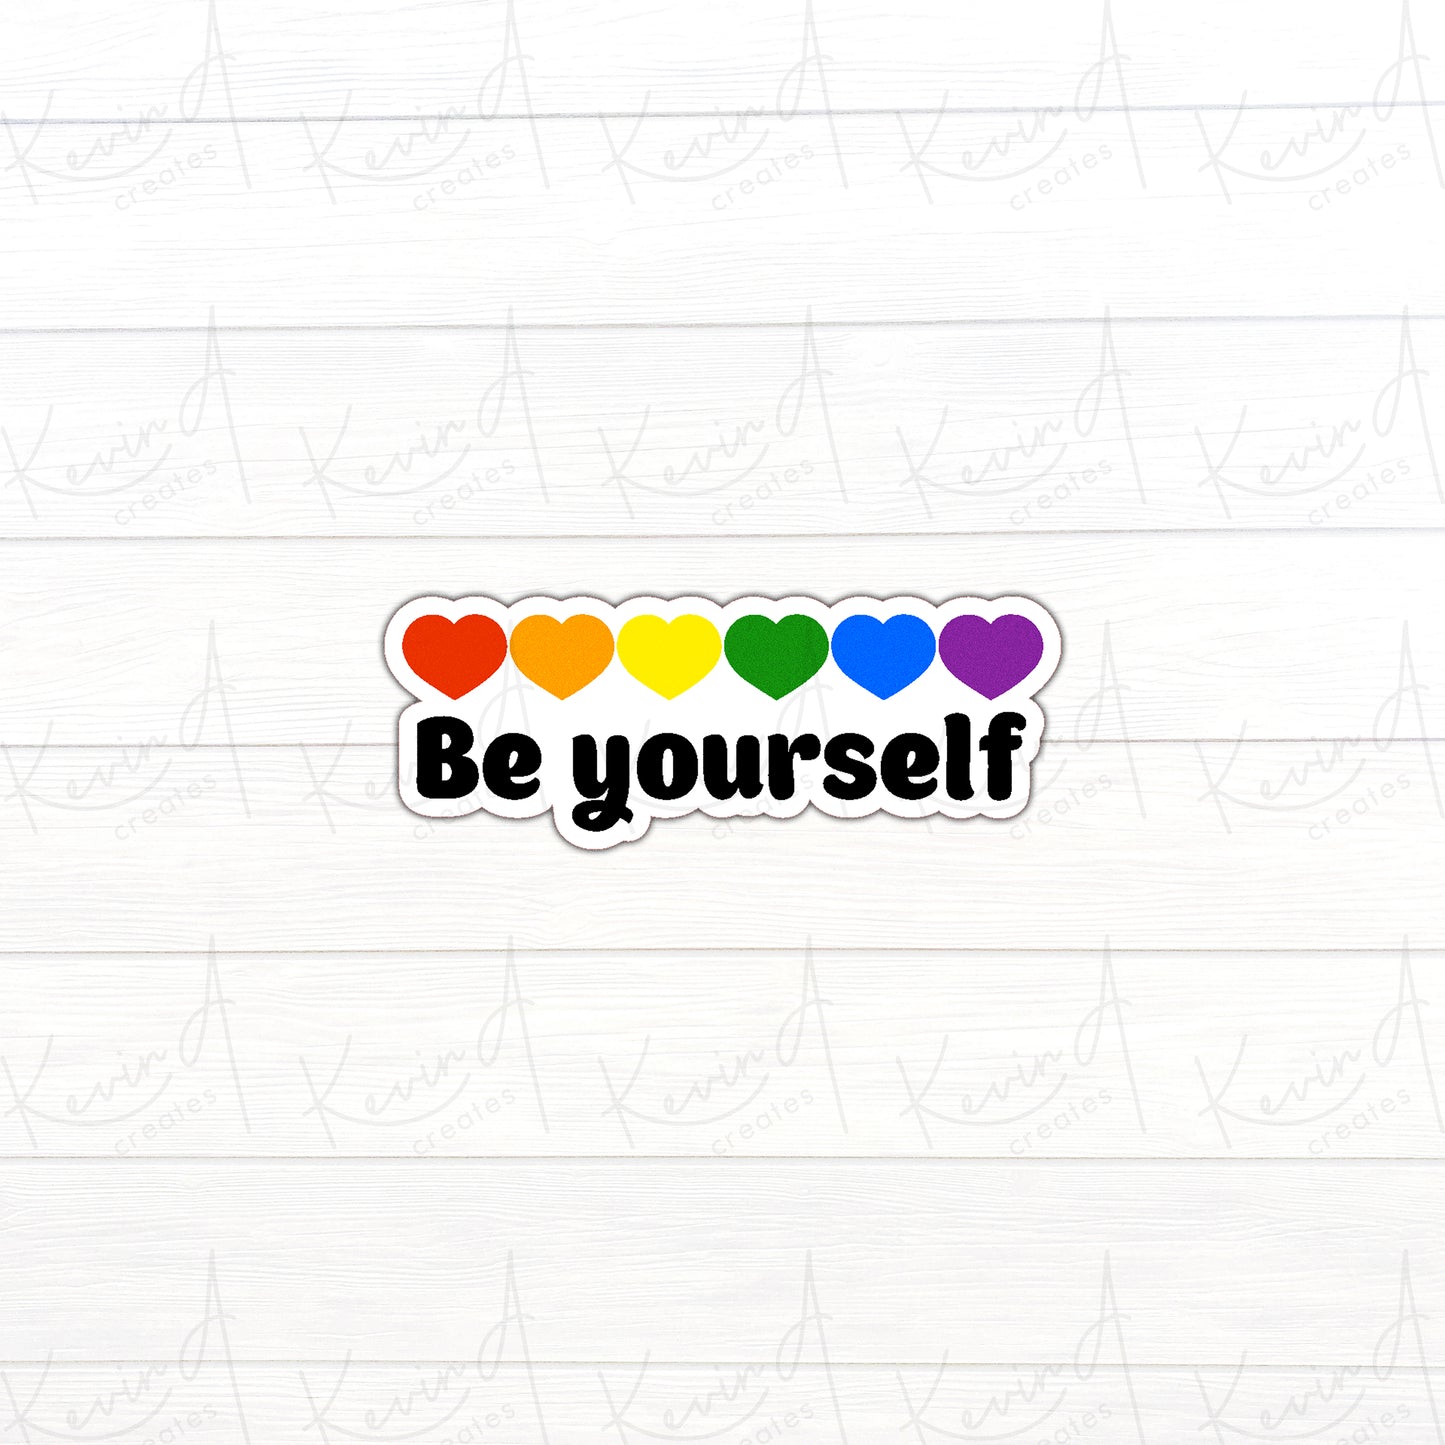 DC-019, "Be Yourself" Pride Die Cut Stickers